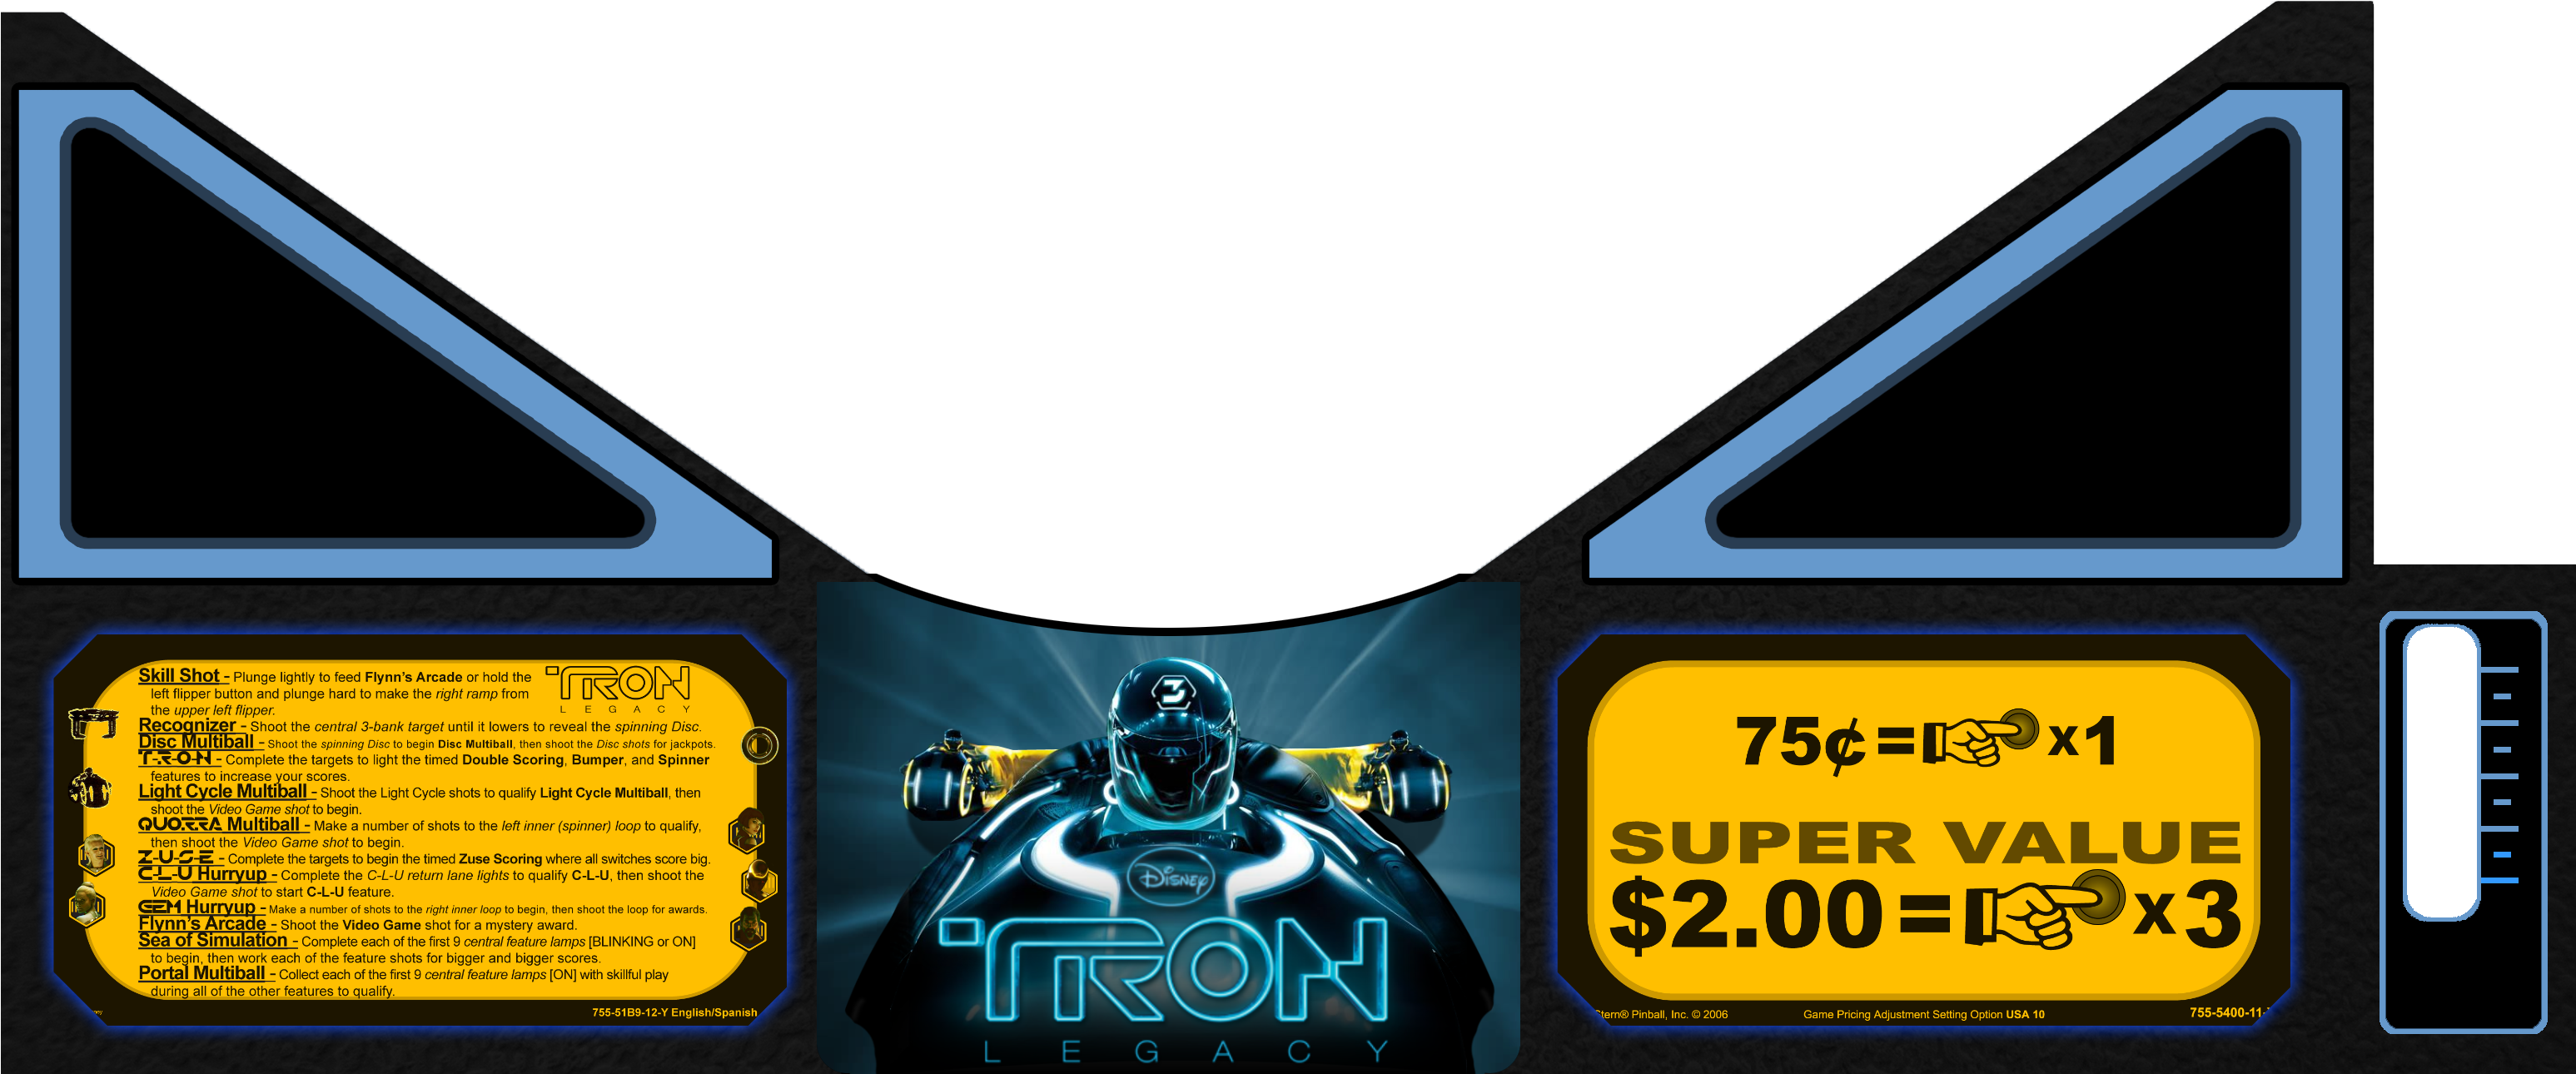 Tron Leapron - Disney - Tron Book Of The Film (3093x1300), Png Download